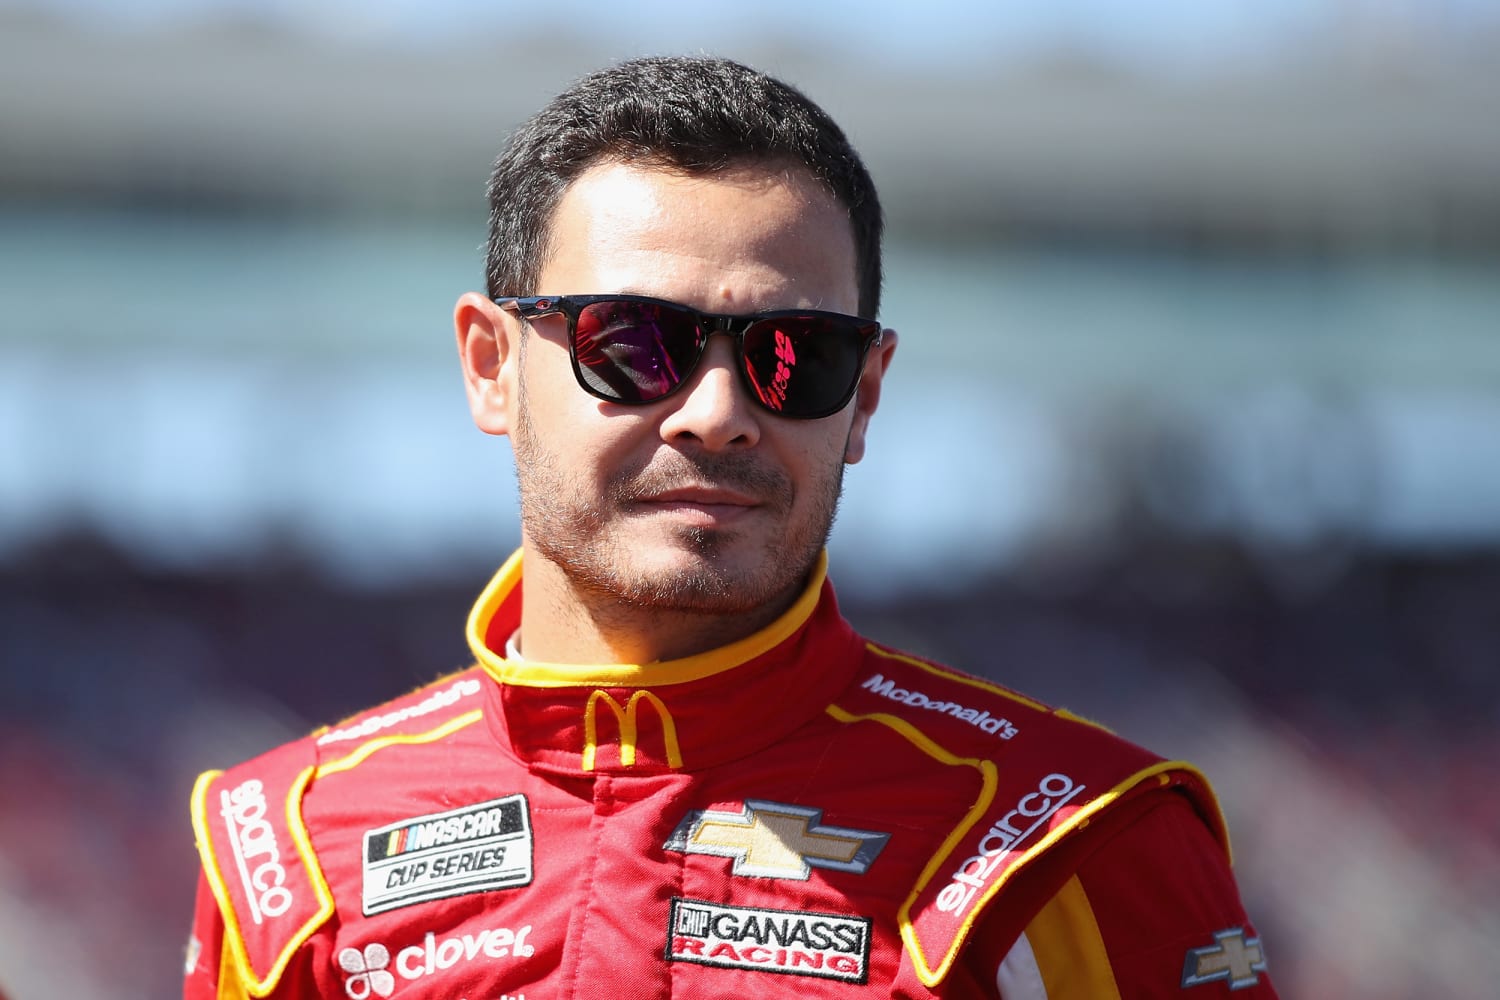 NASCAR star Kyle Larson suspended for using N-word during virtual race